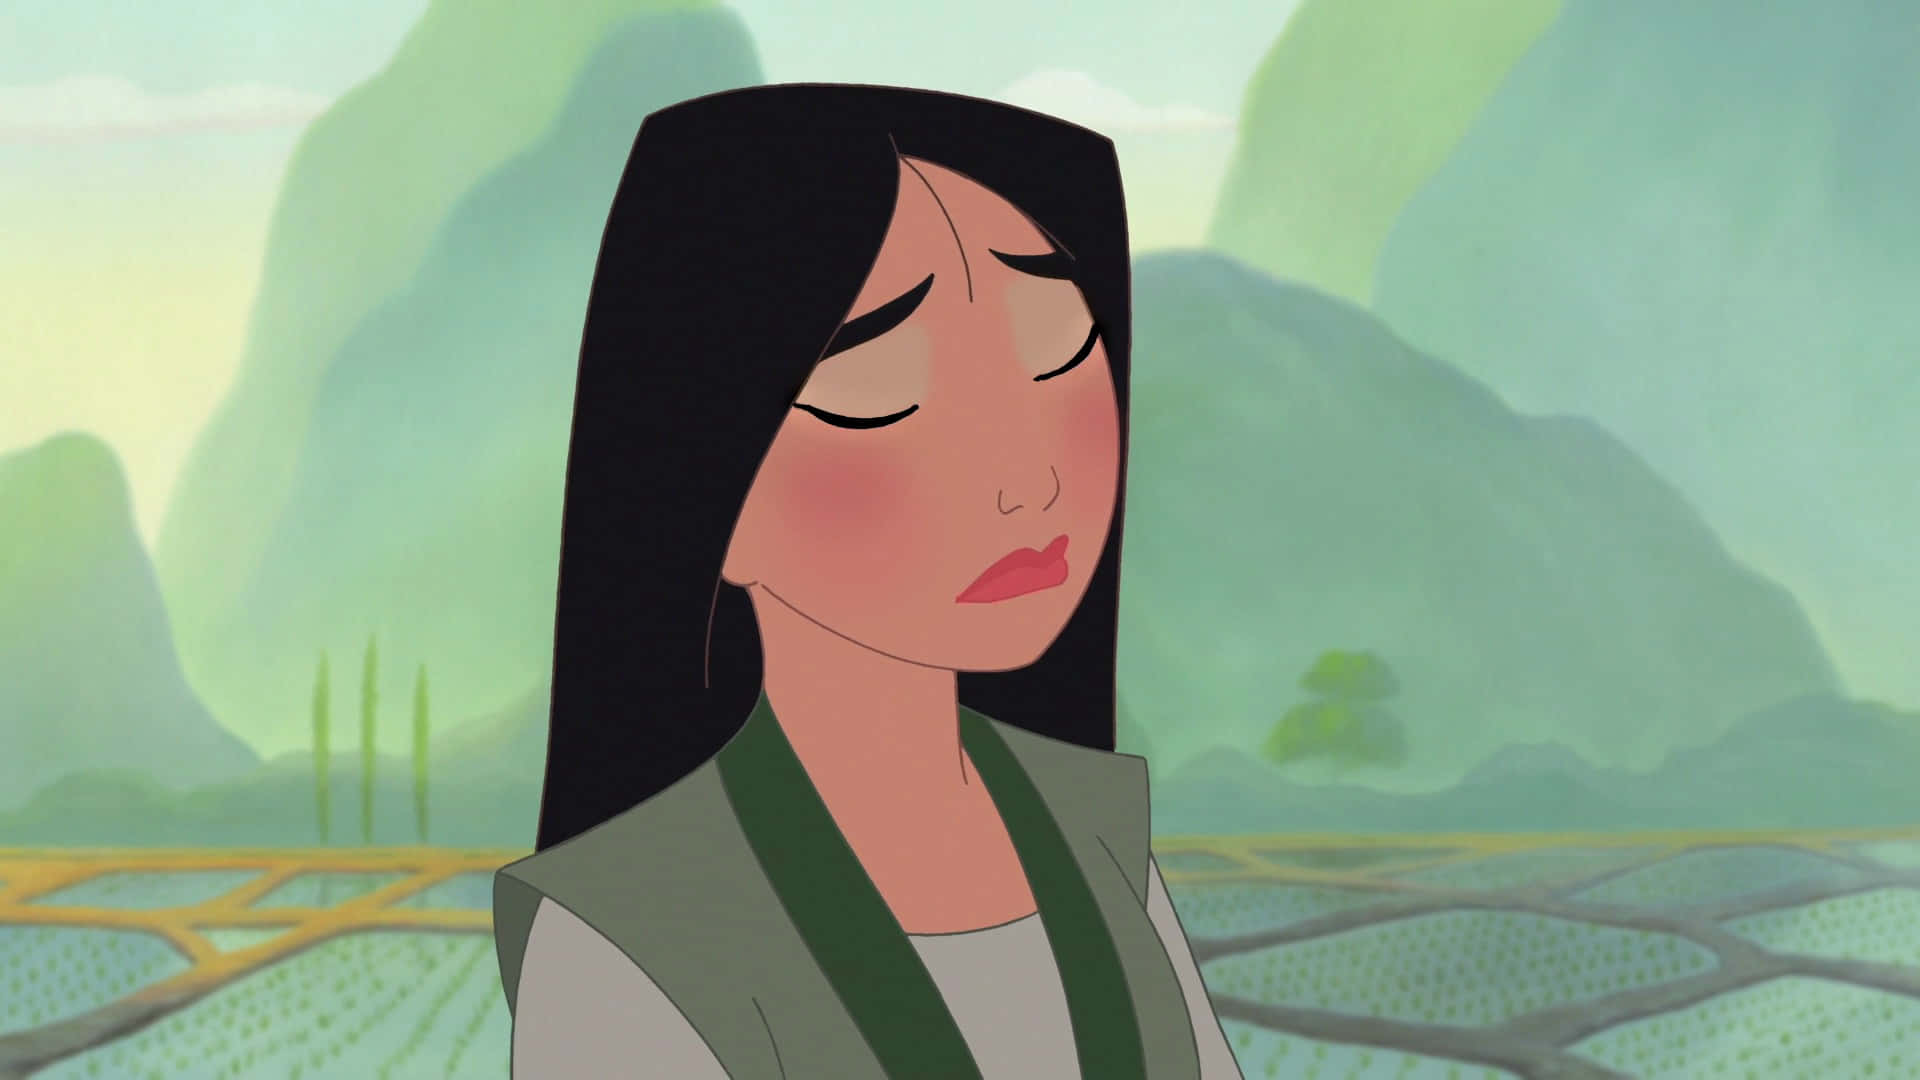 Relive the greatness of Disney’s Mulan